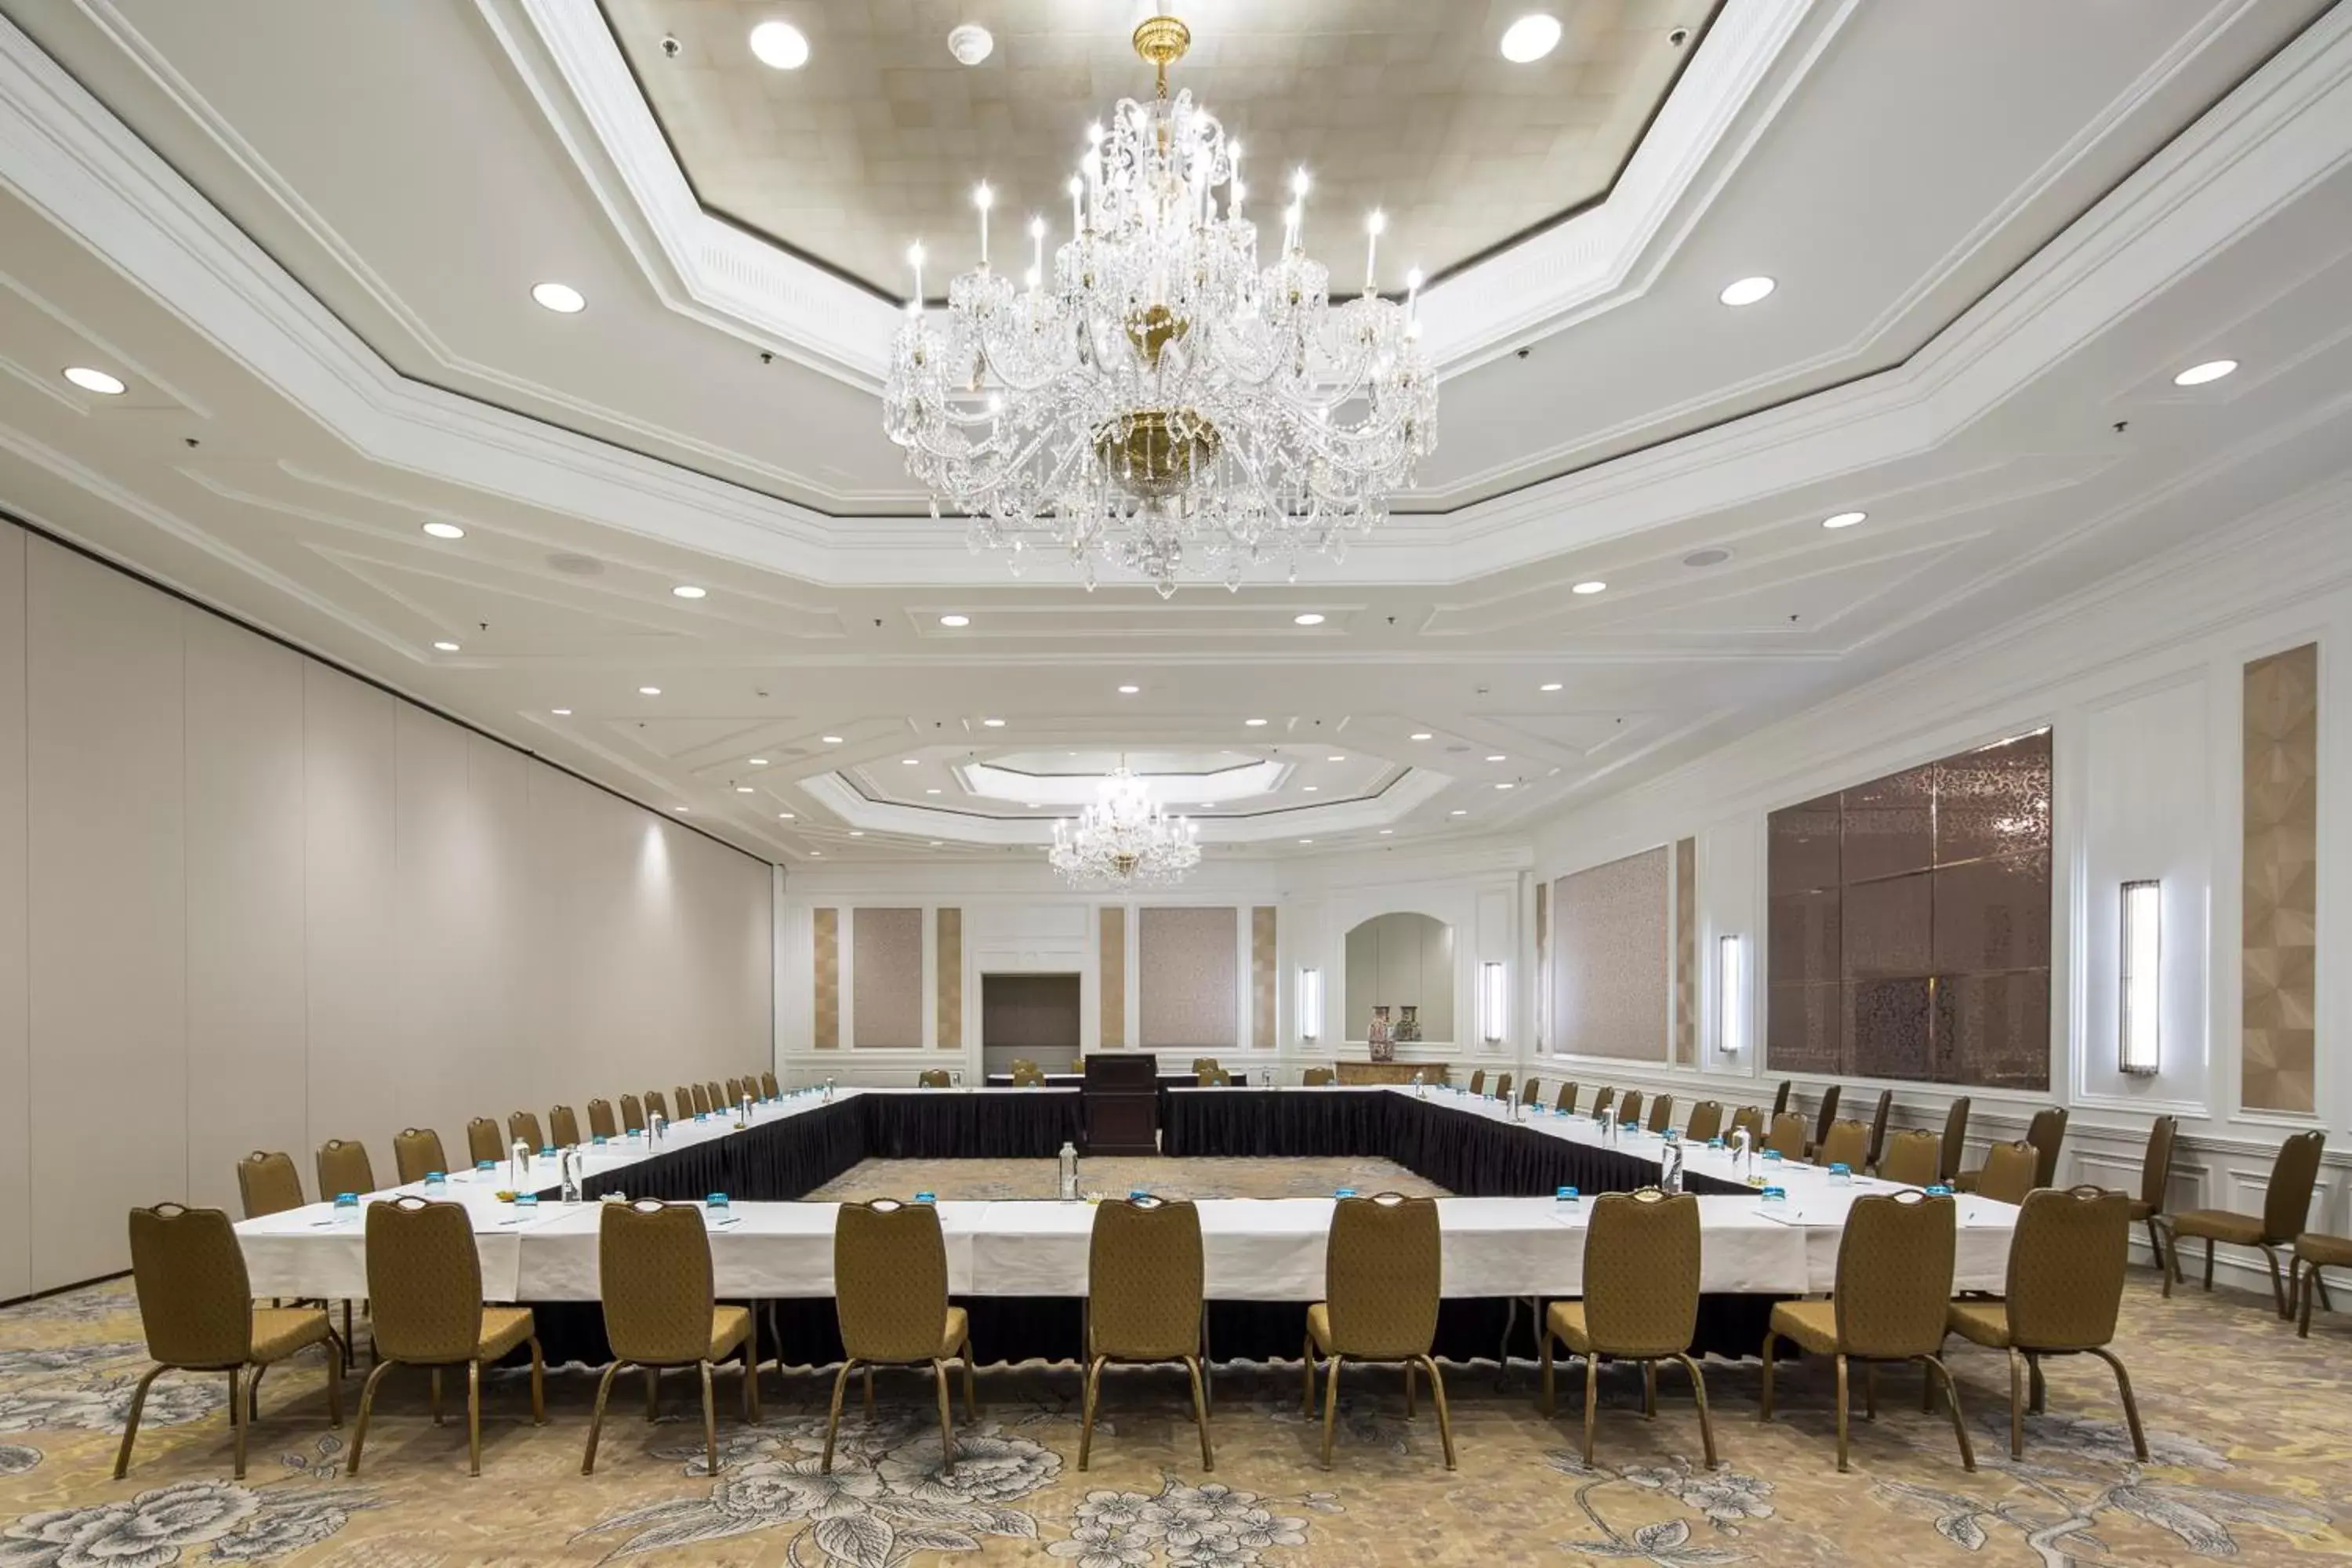 Meeting/conference room in Eau Palm Beach Resort & Spa